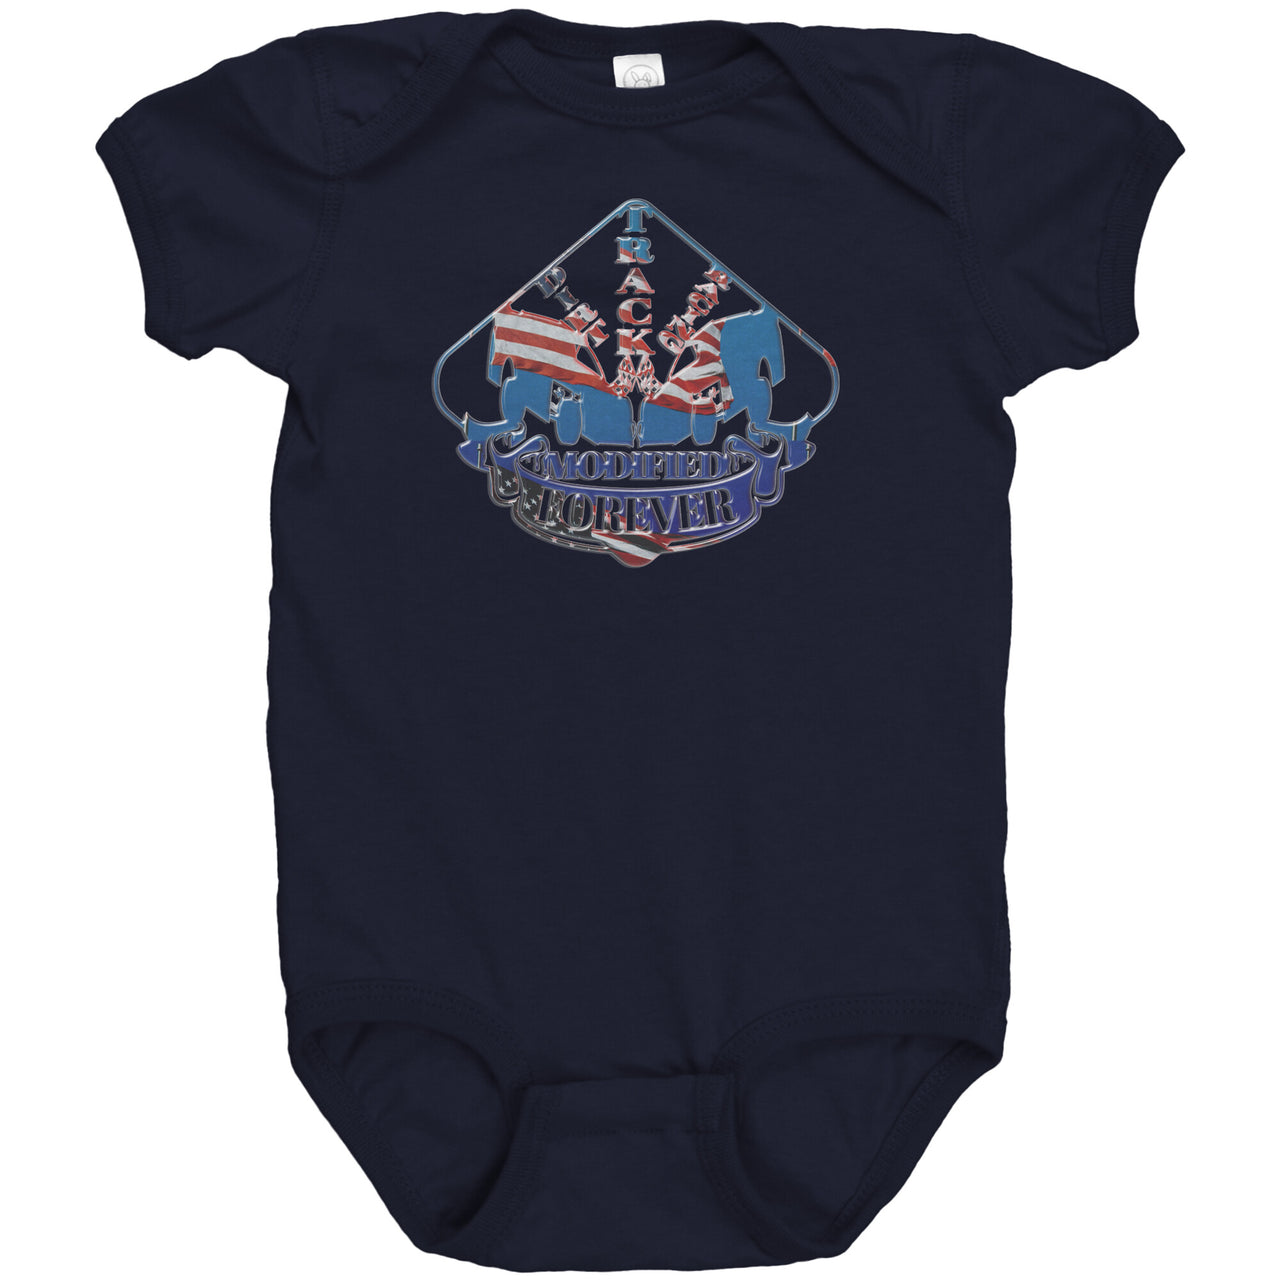 USA Dirt Modified Forever Baby T-Shirts